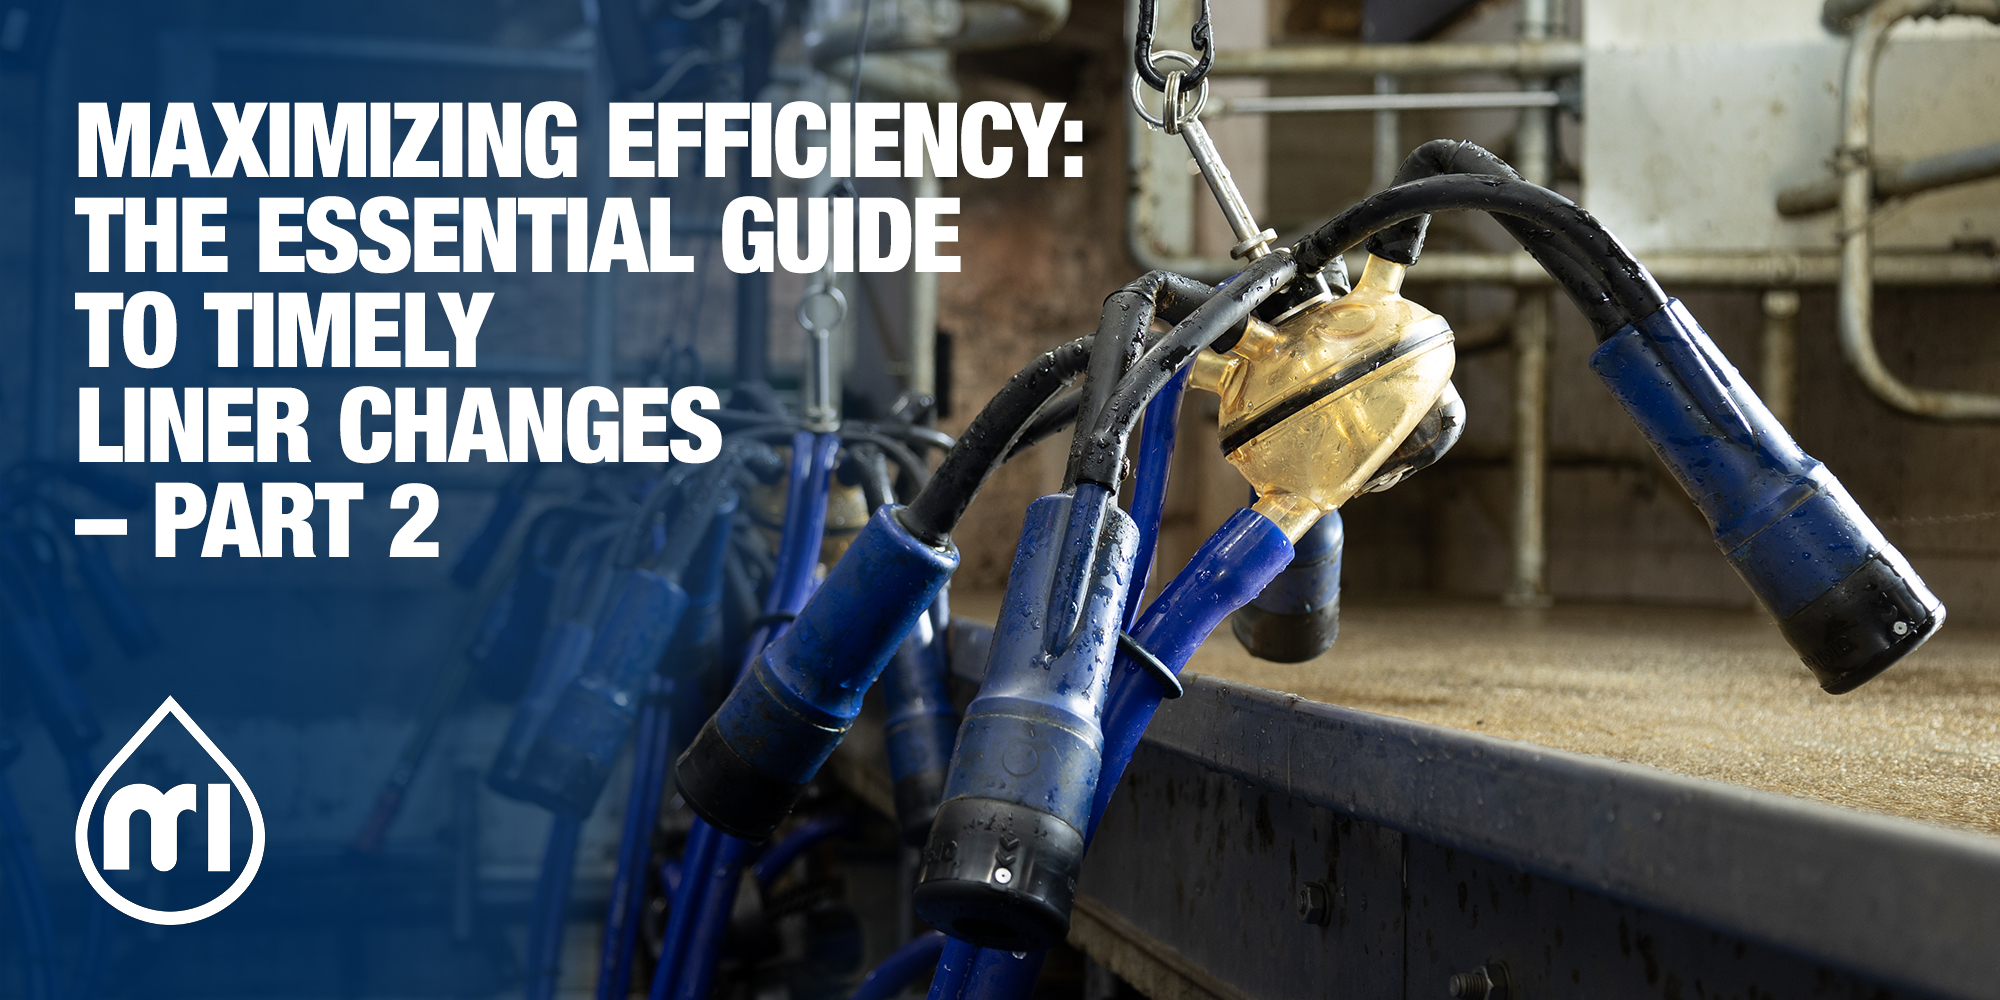 Maximizing efficiency: the essential guide to timely liner changes – Part 2